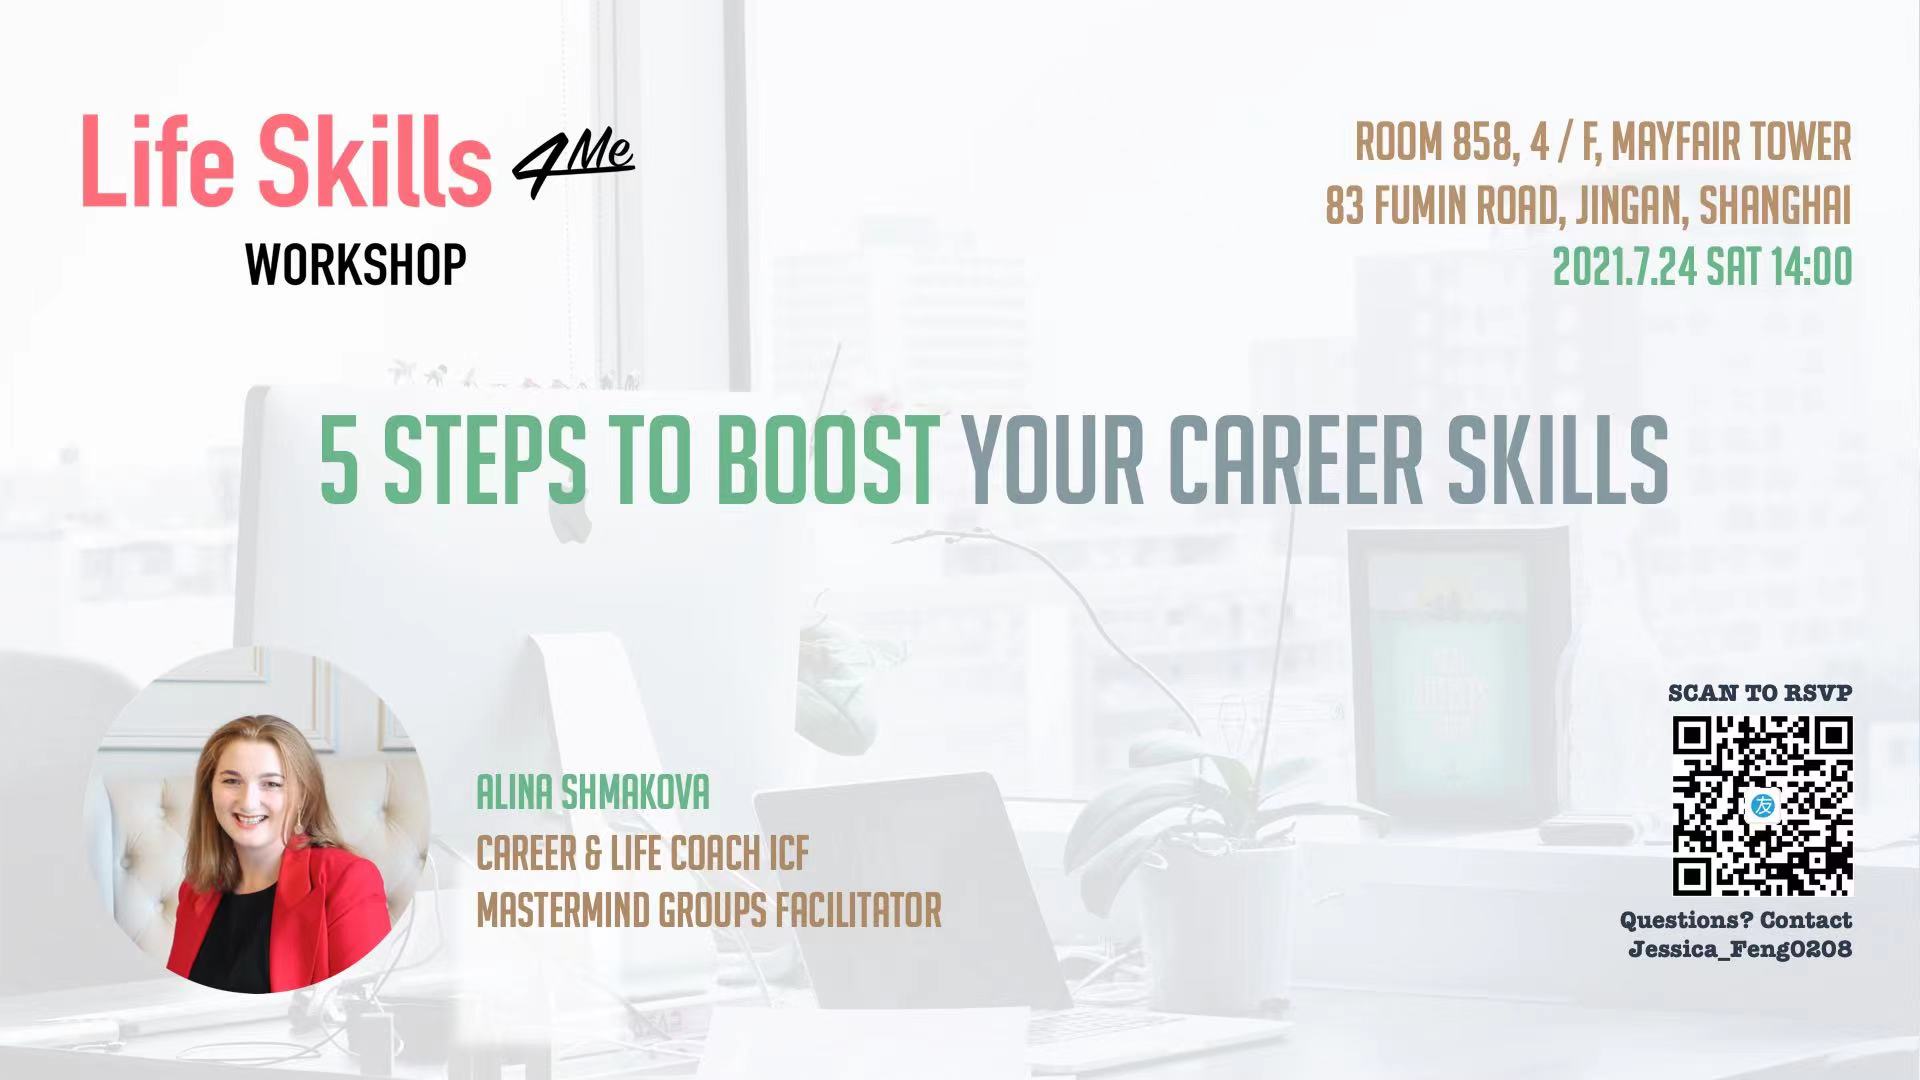 5 steps to boost your career skills